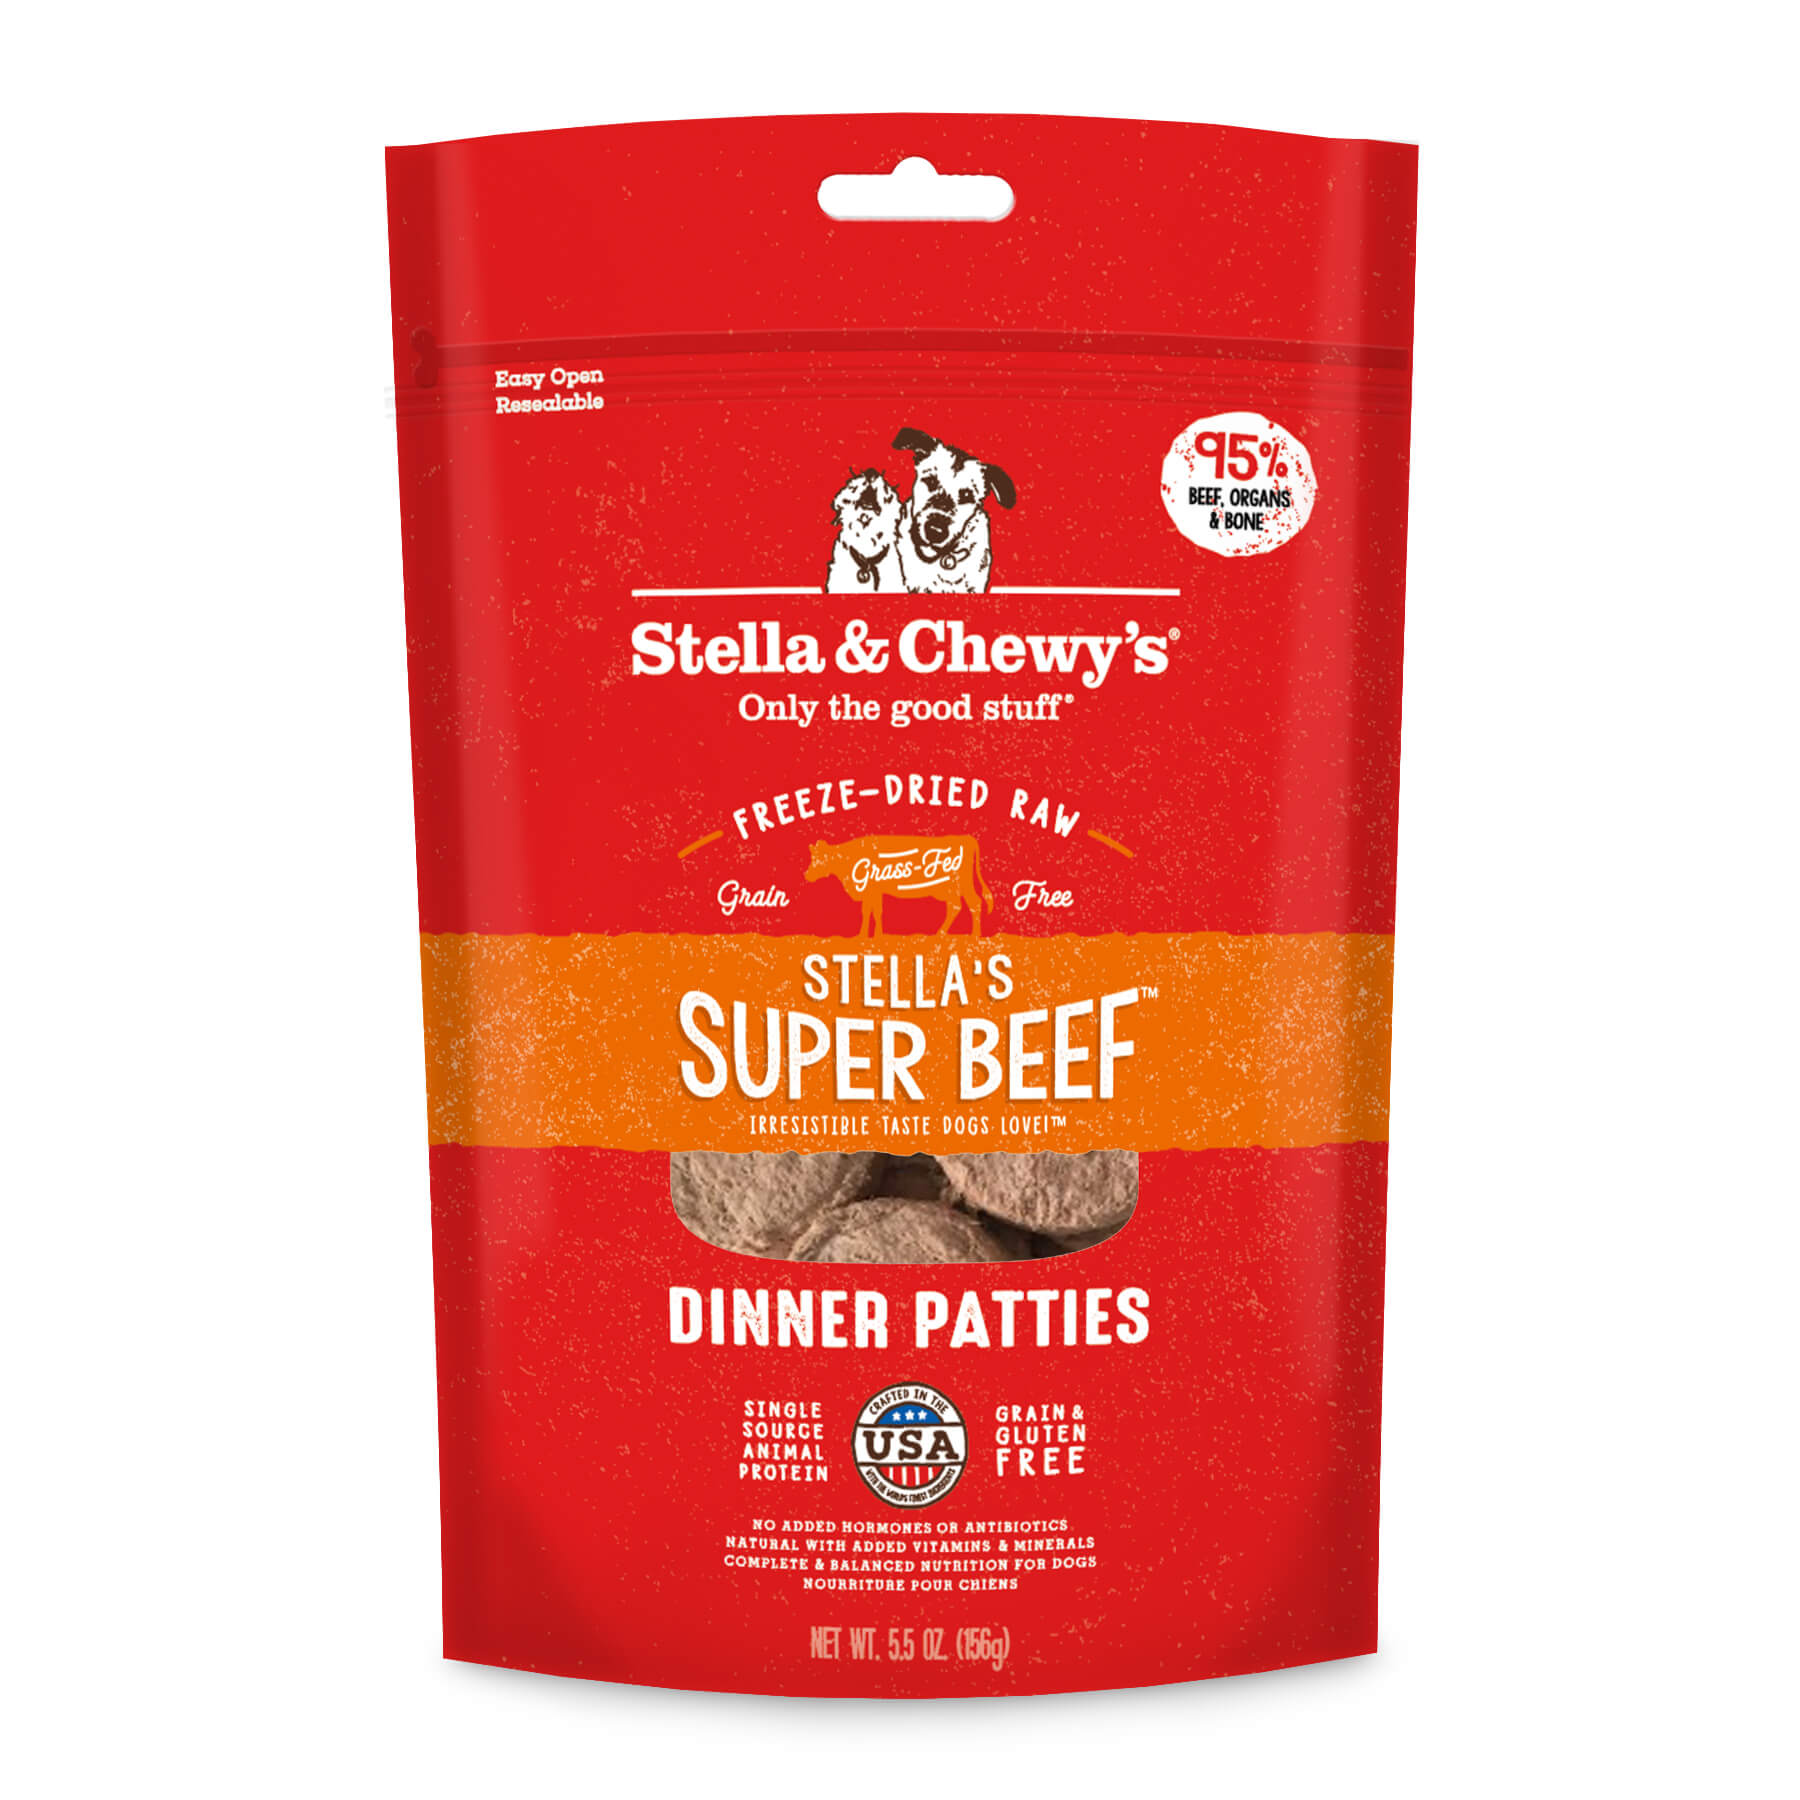 Stella's Super Beef Freeze-Dried Raw Dinner Patties Packaging Front